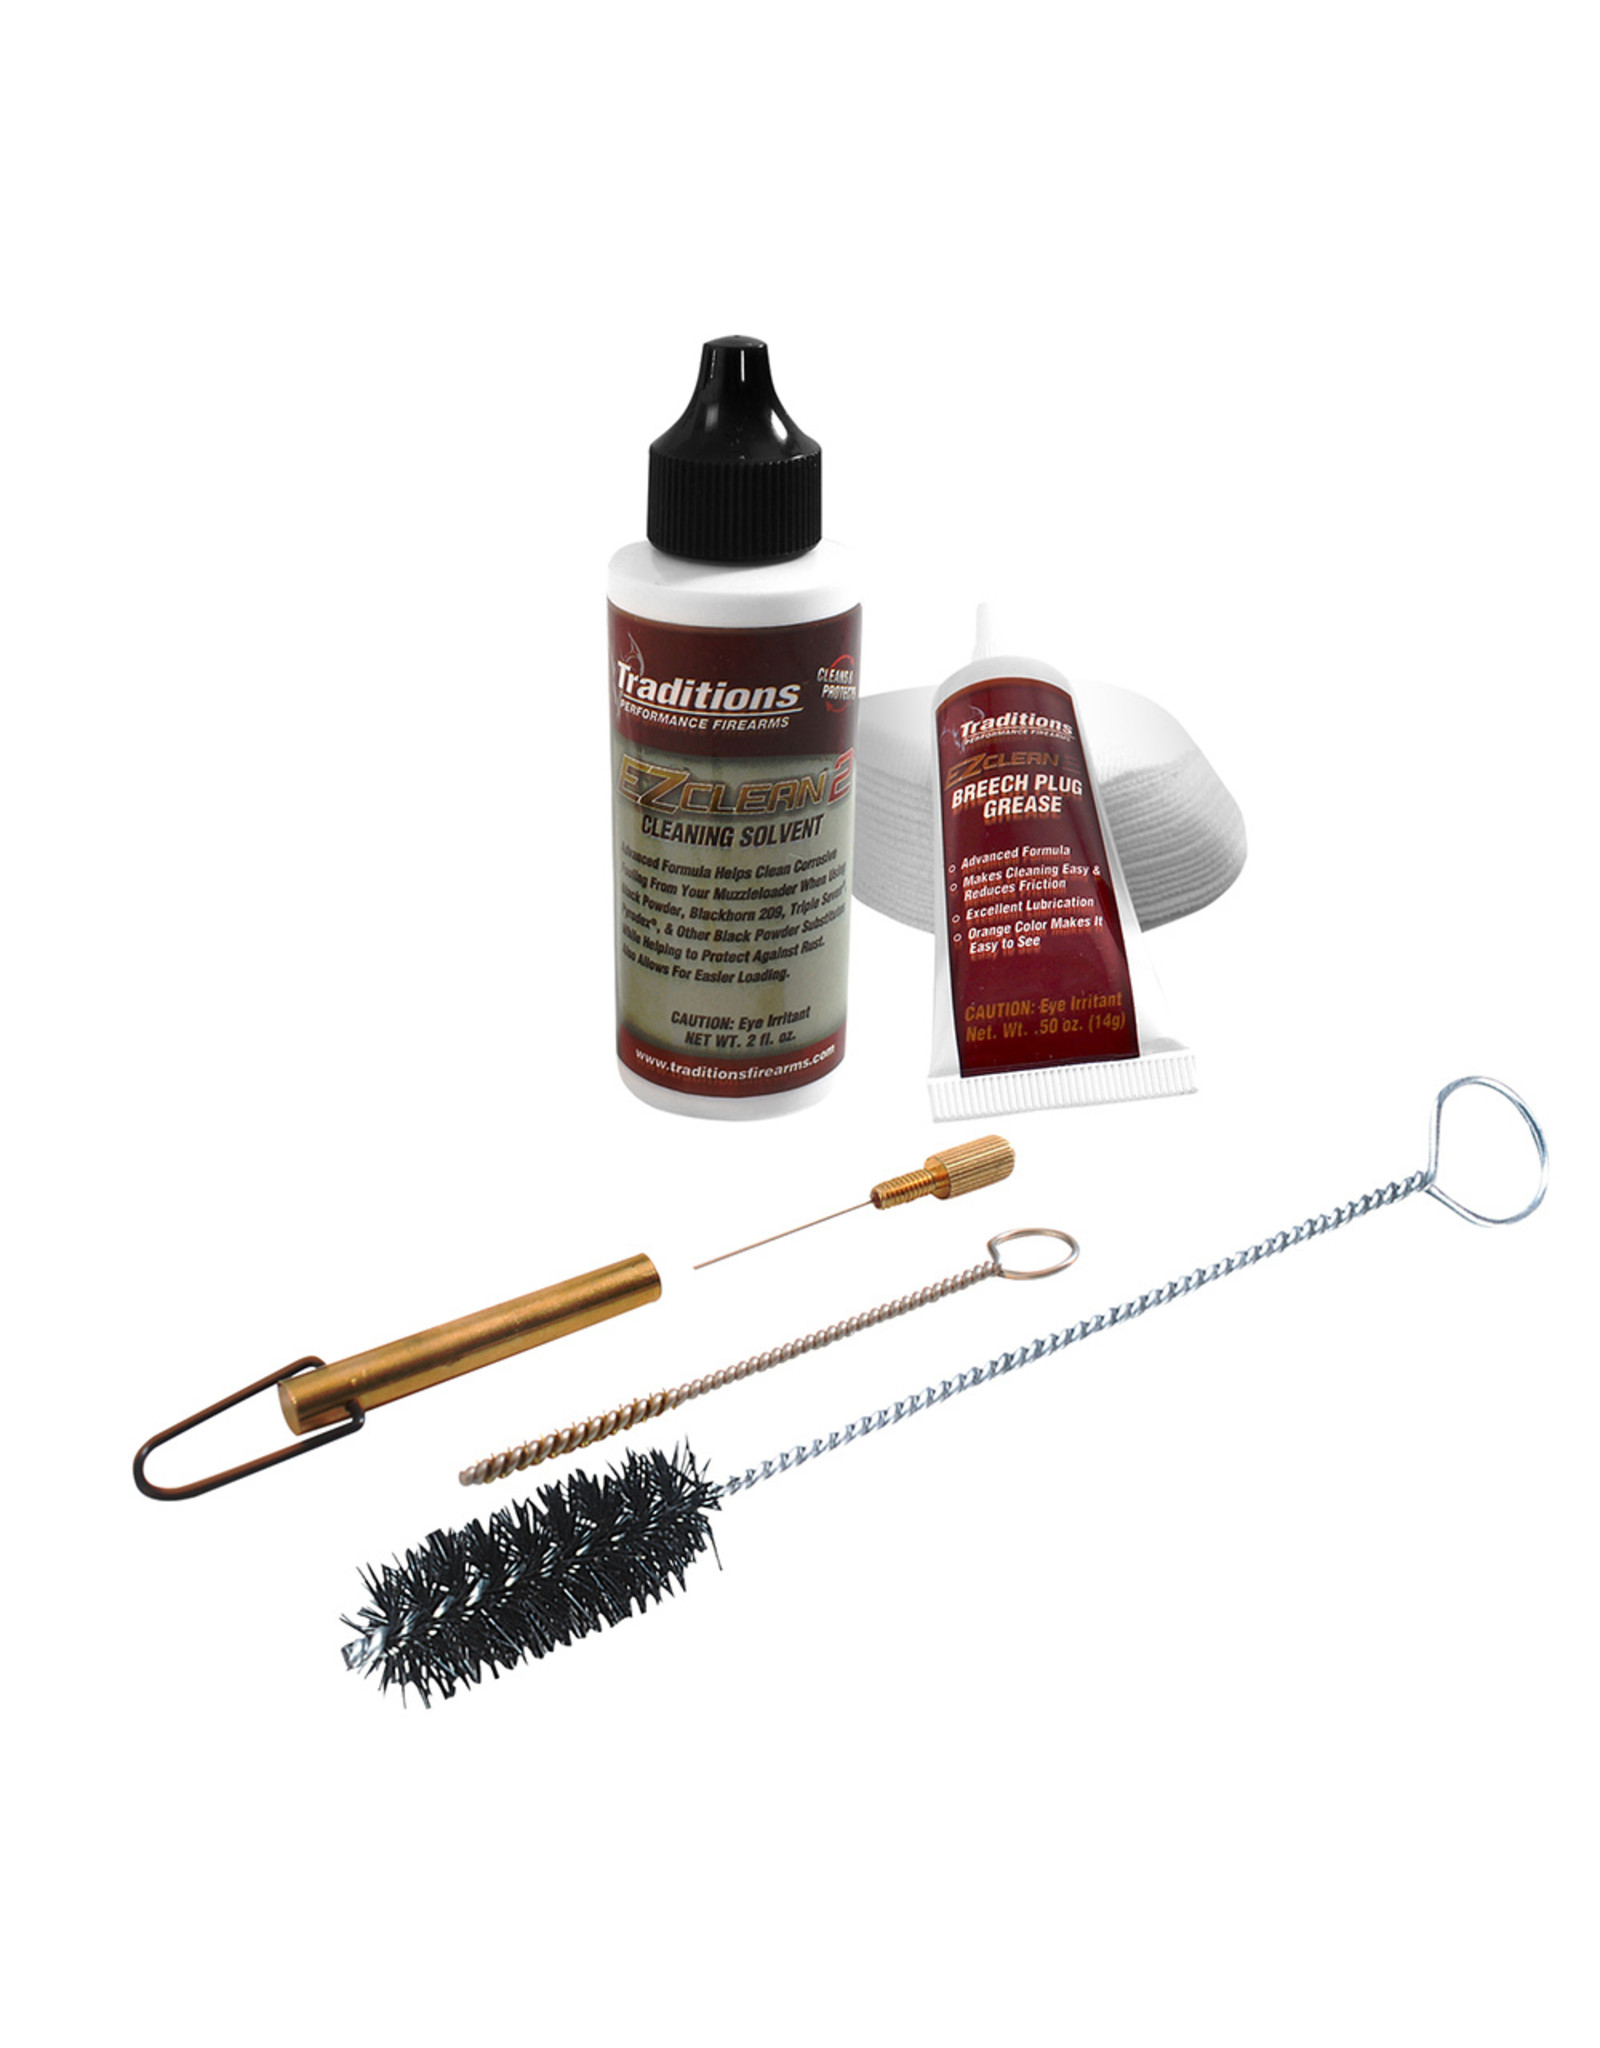 Traditions TRAD A3831 BREECH PLUG CLEANING KIT